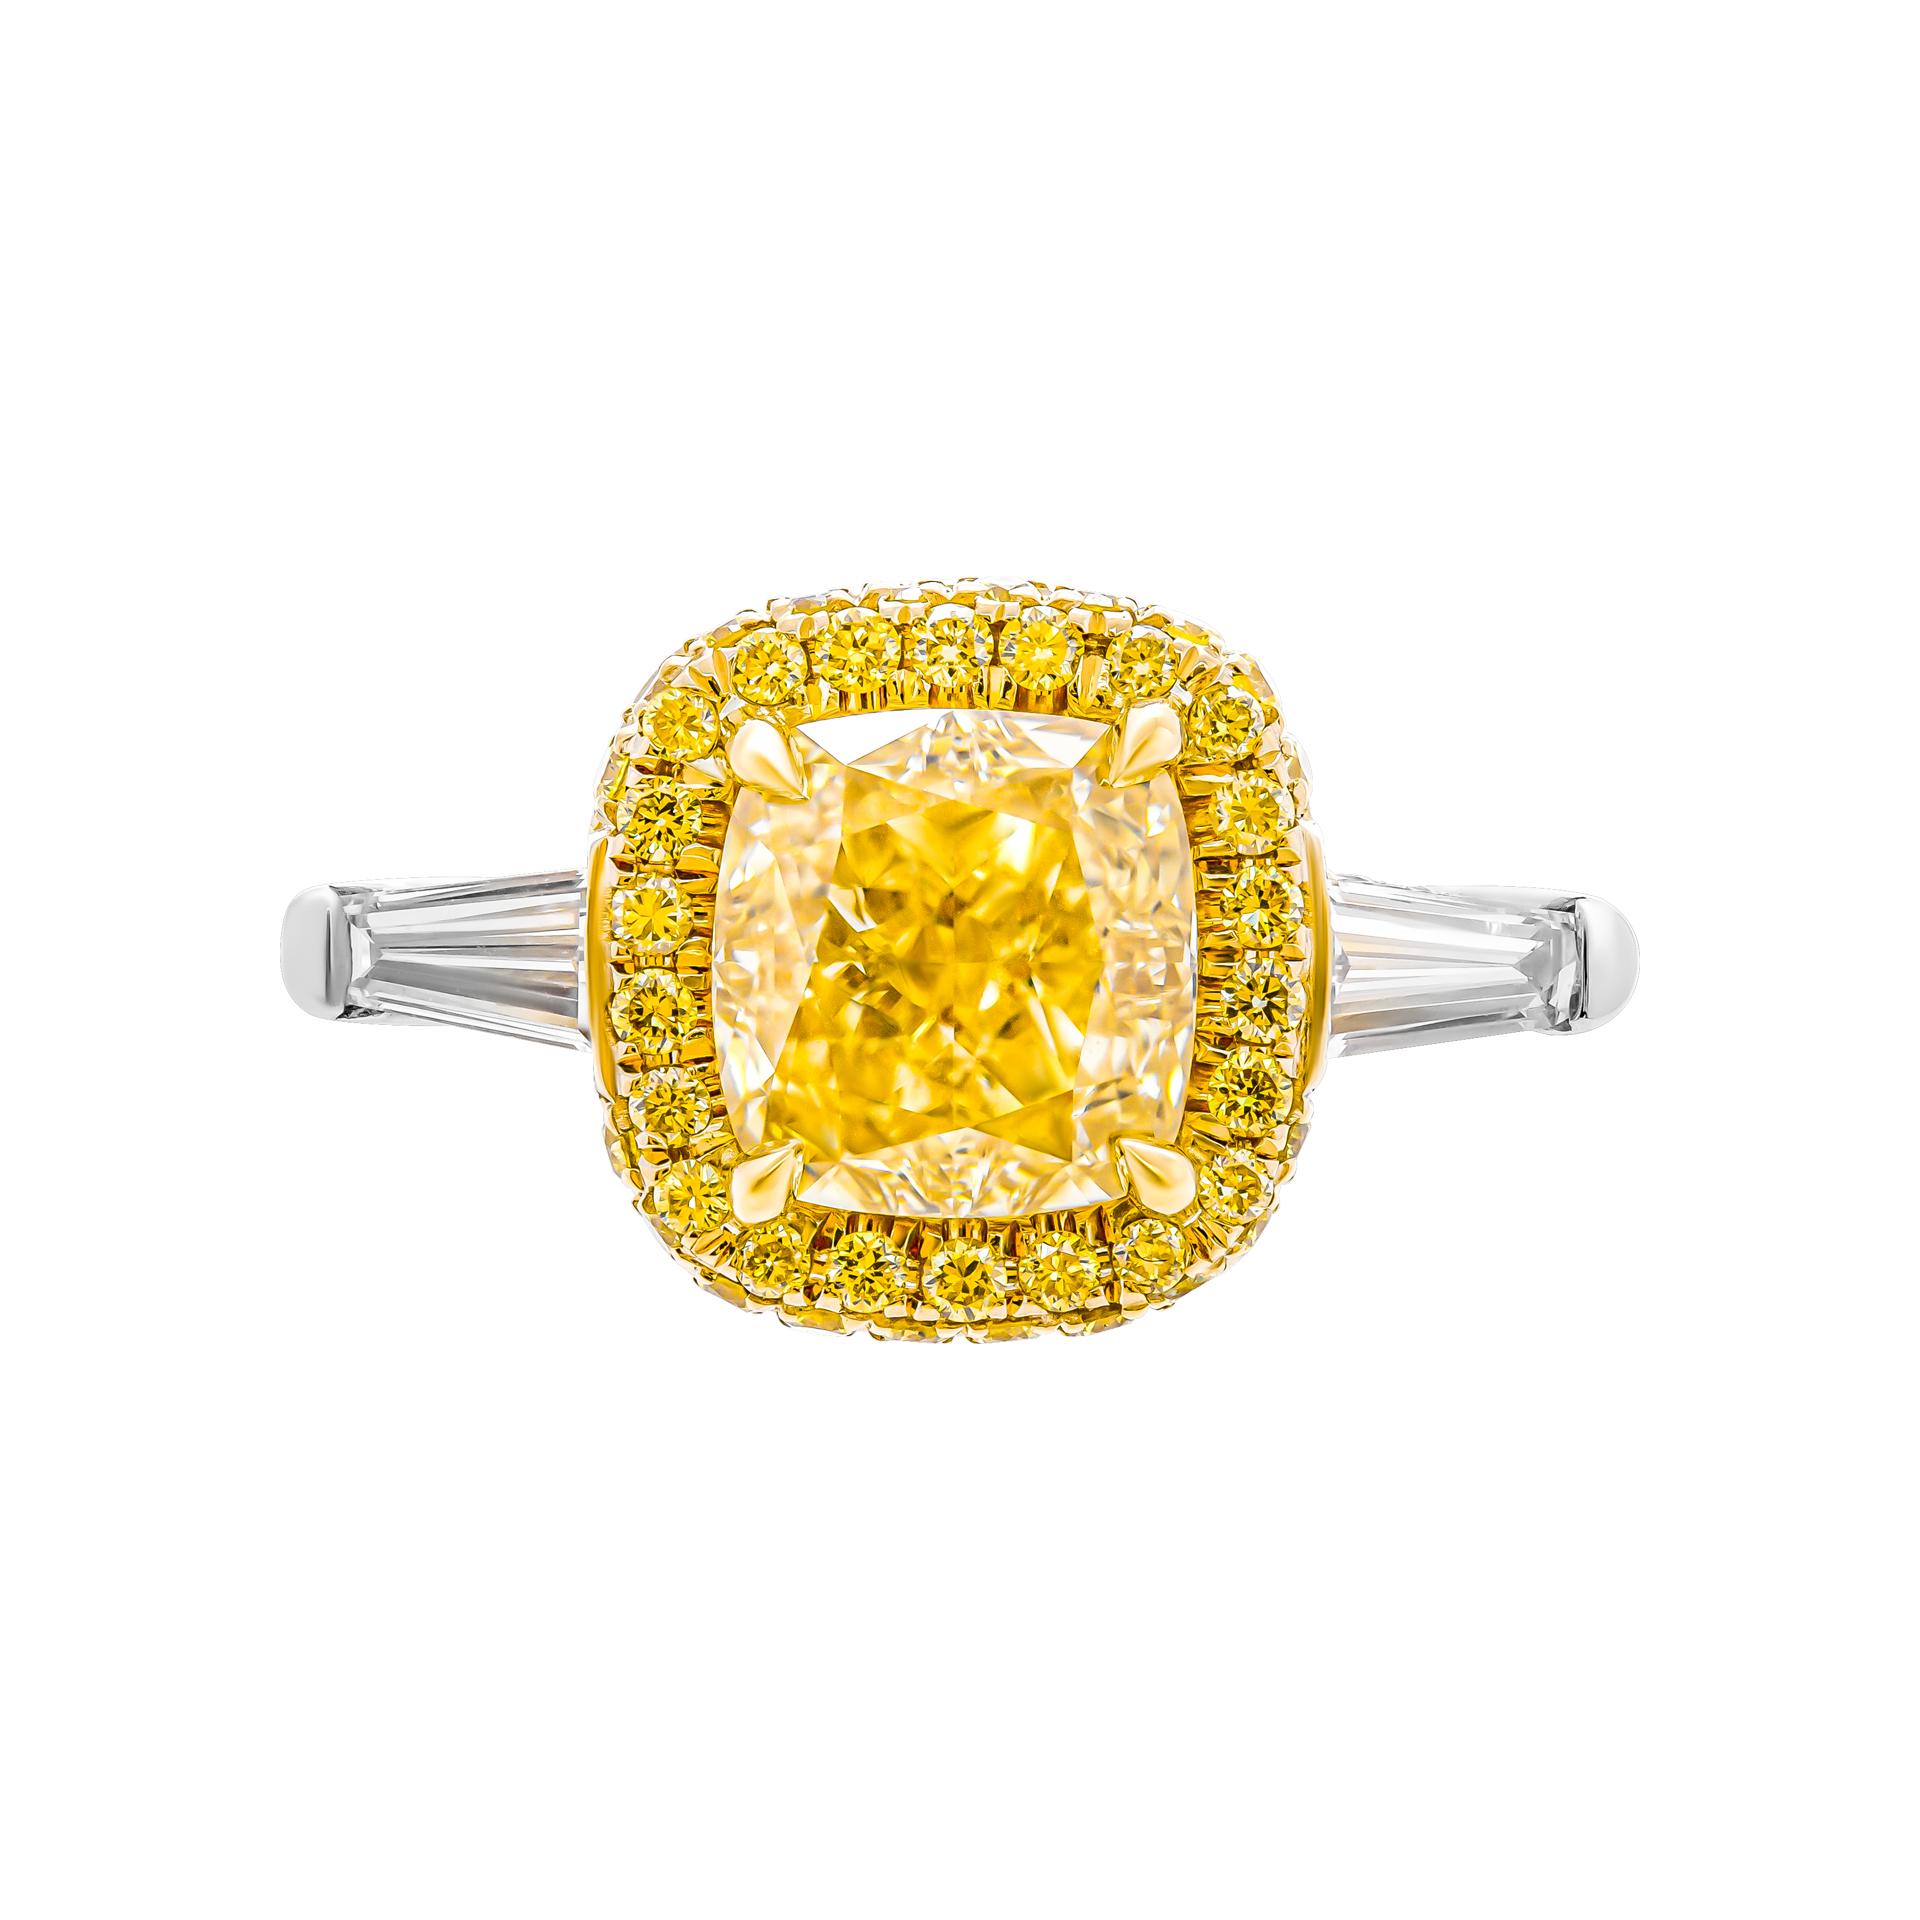 3 stone ring in 18K Yellow Gold & PT950 
Center stone: 2.29ct Natural Fancy Yellow Even VVS2 Cushion Shape Diamond GIA#5222222141 Side stones: 0.36ct G VS tapered baguettes
Total Carat Weight pave Yellow: 0.28ct 
Total Carat Weight pave  pave White: